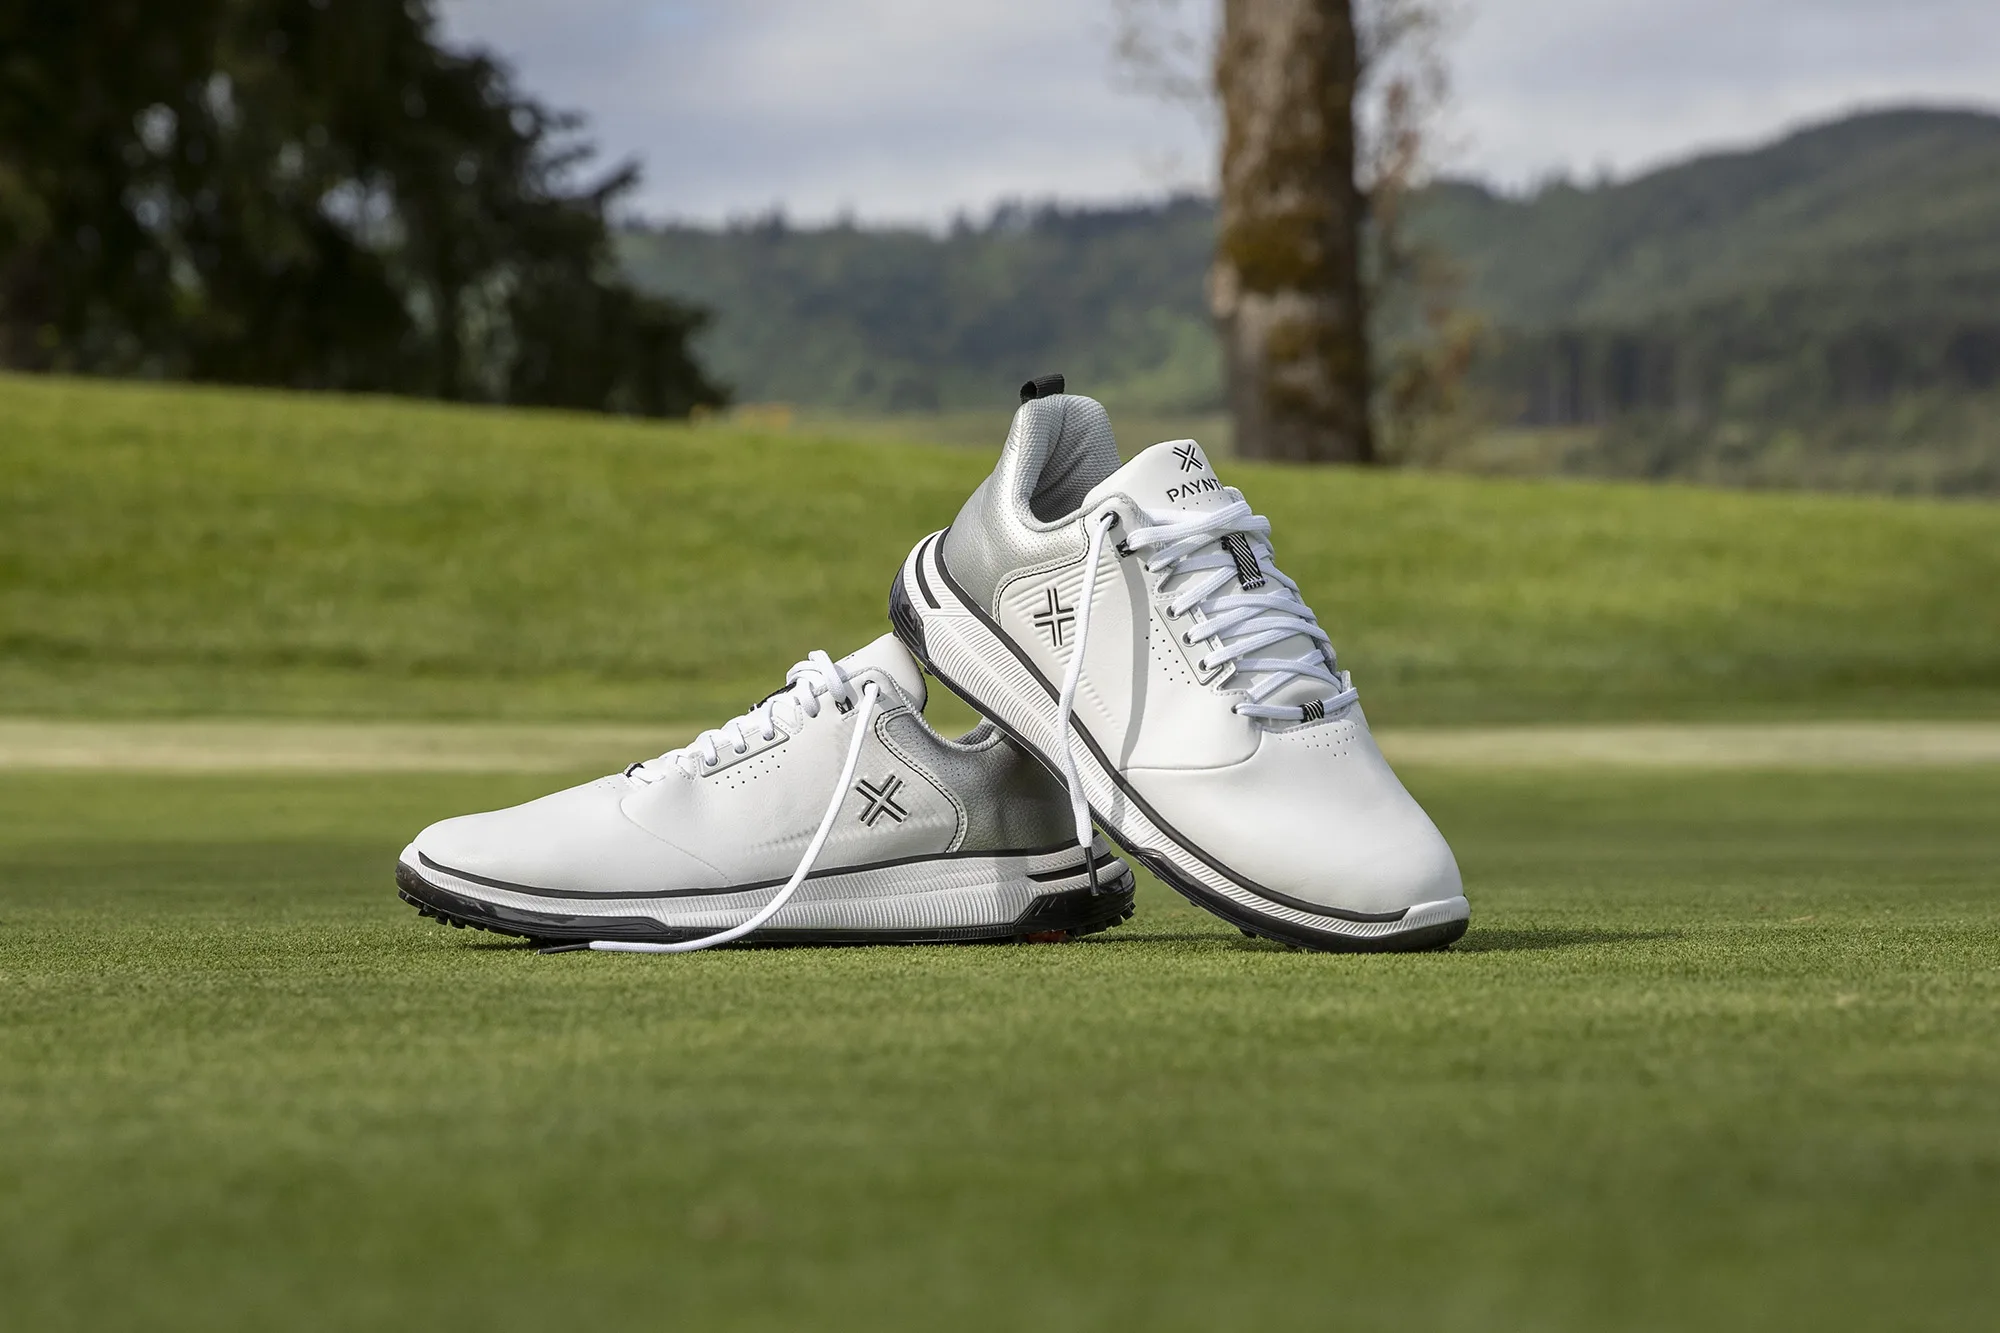 WIN! A pair of PAYNTR Golf X-006 spiked golf shoes